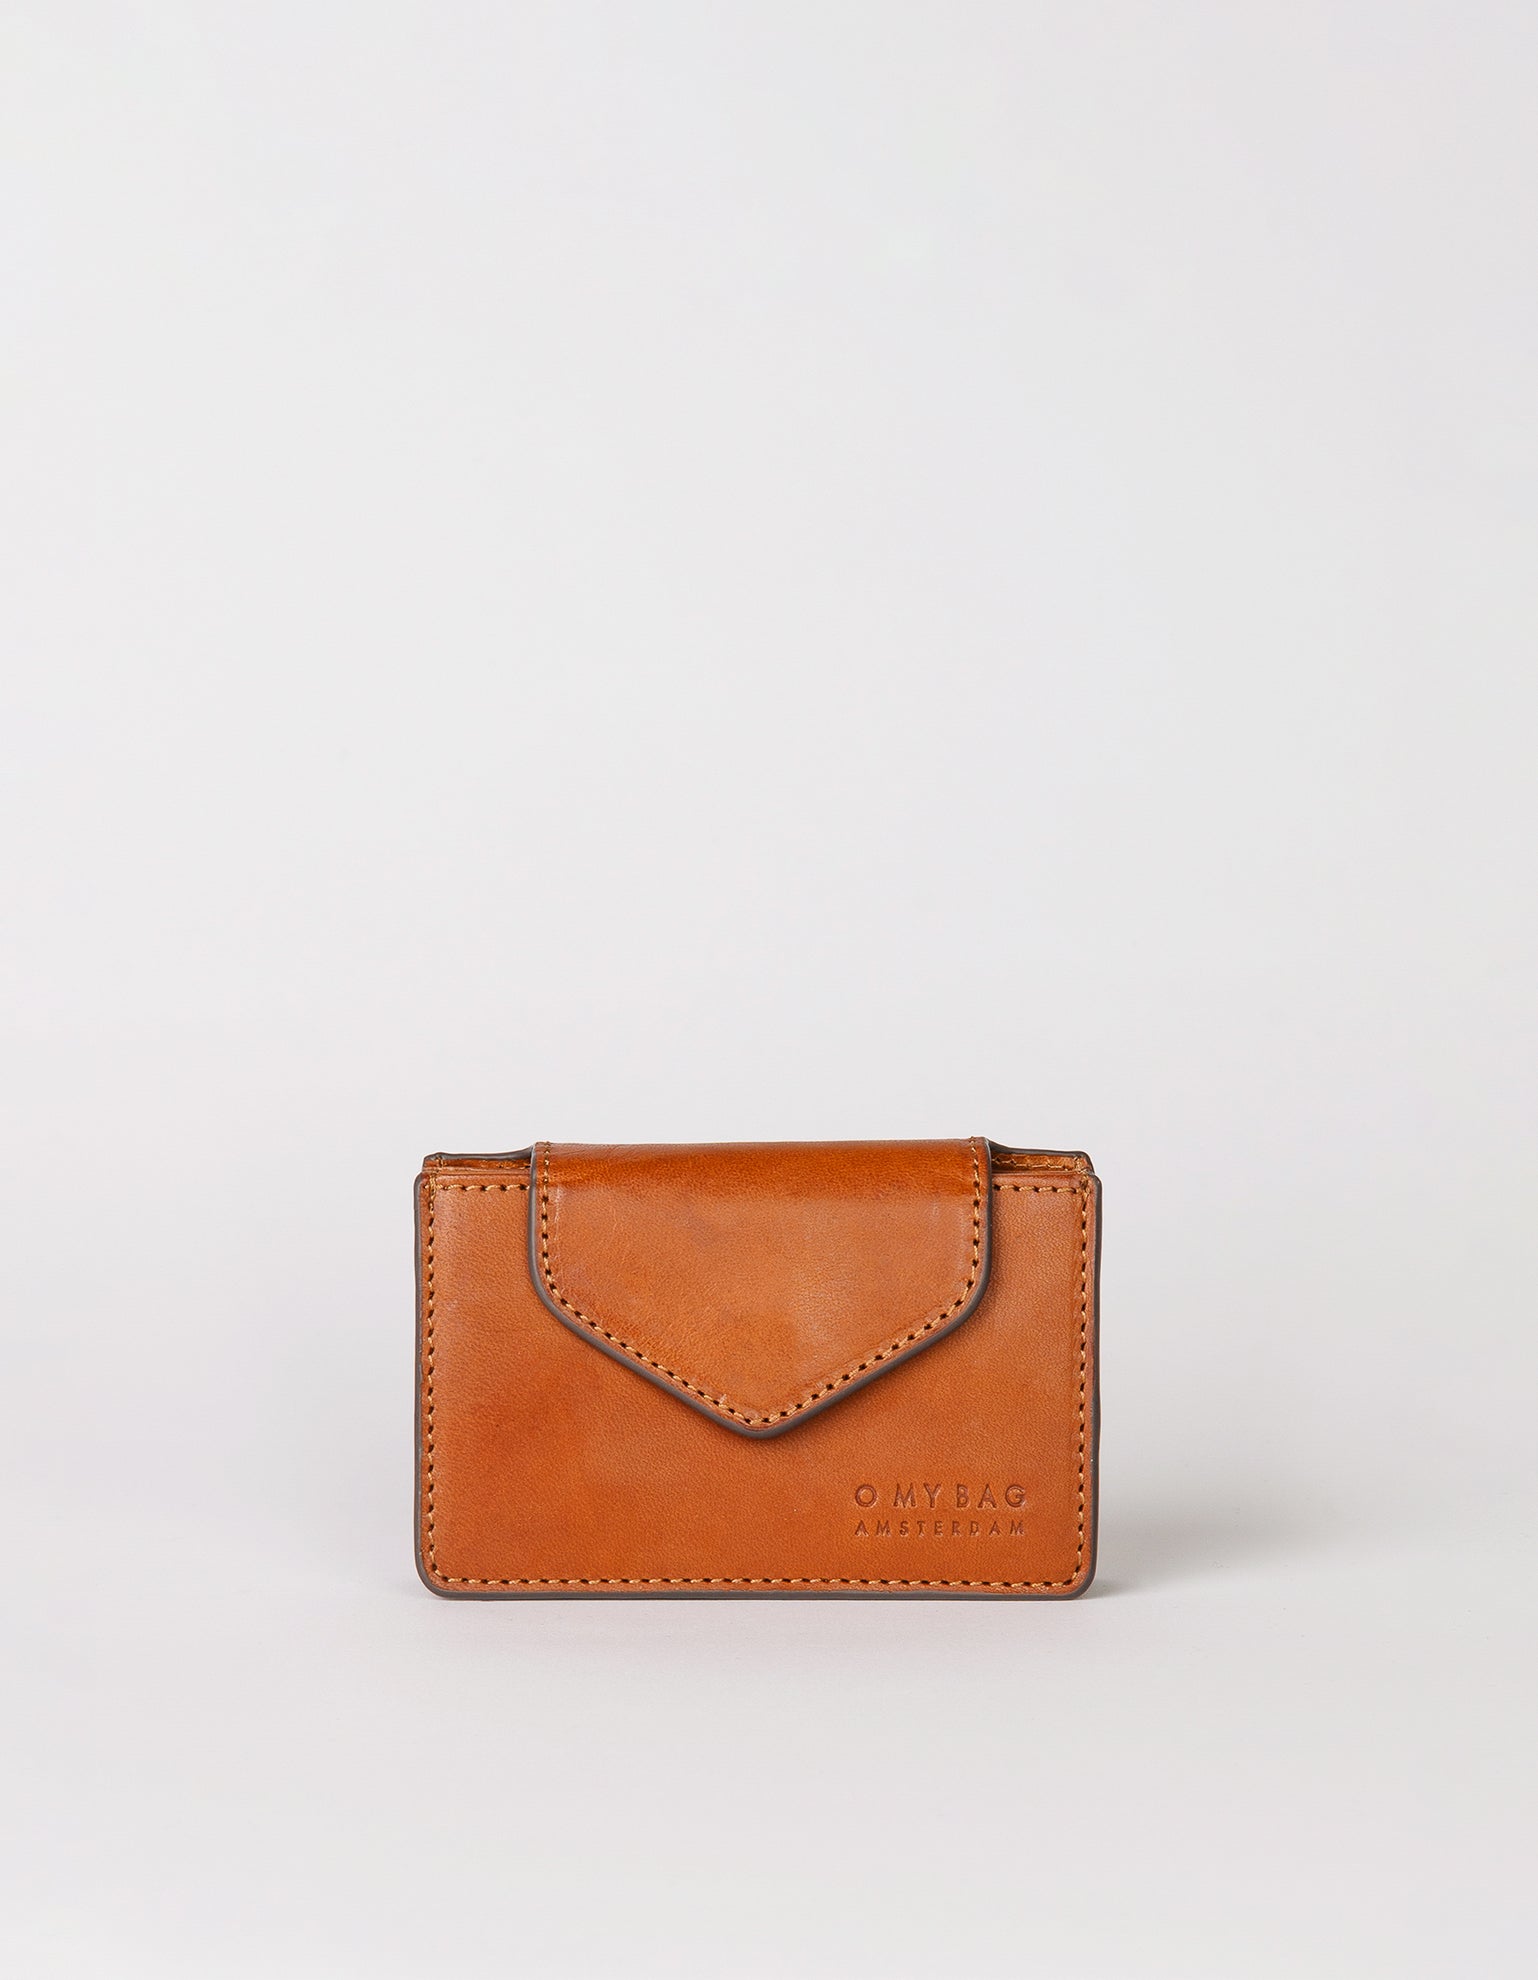 Harmonica Wallet Small Cognac Classic Leather by O My Bag. Square shape. Front product image